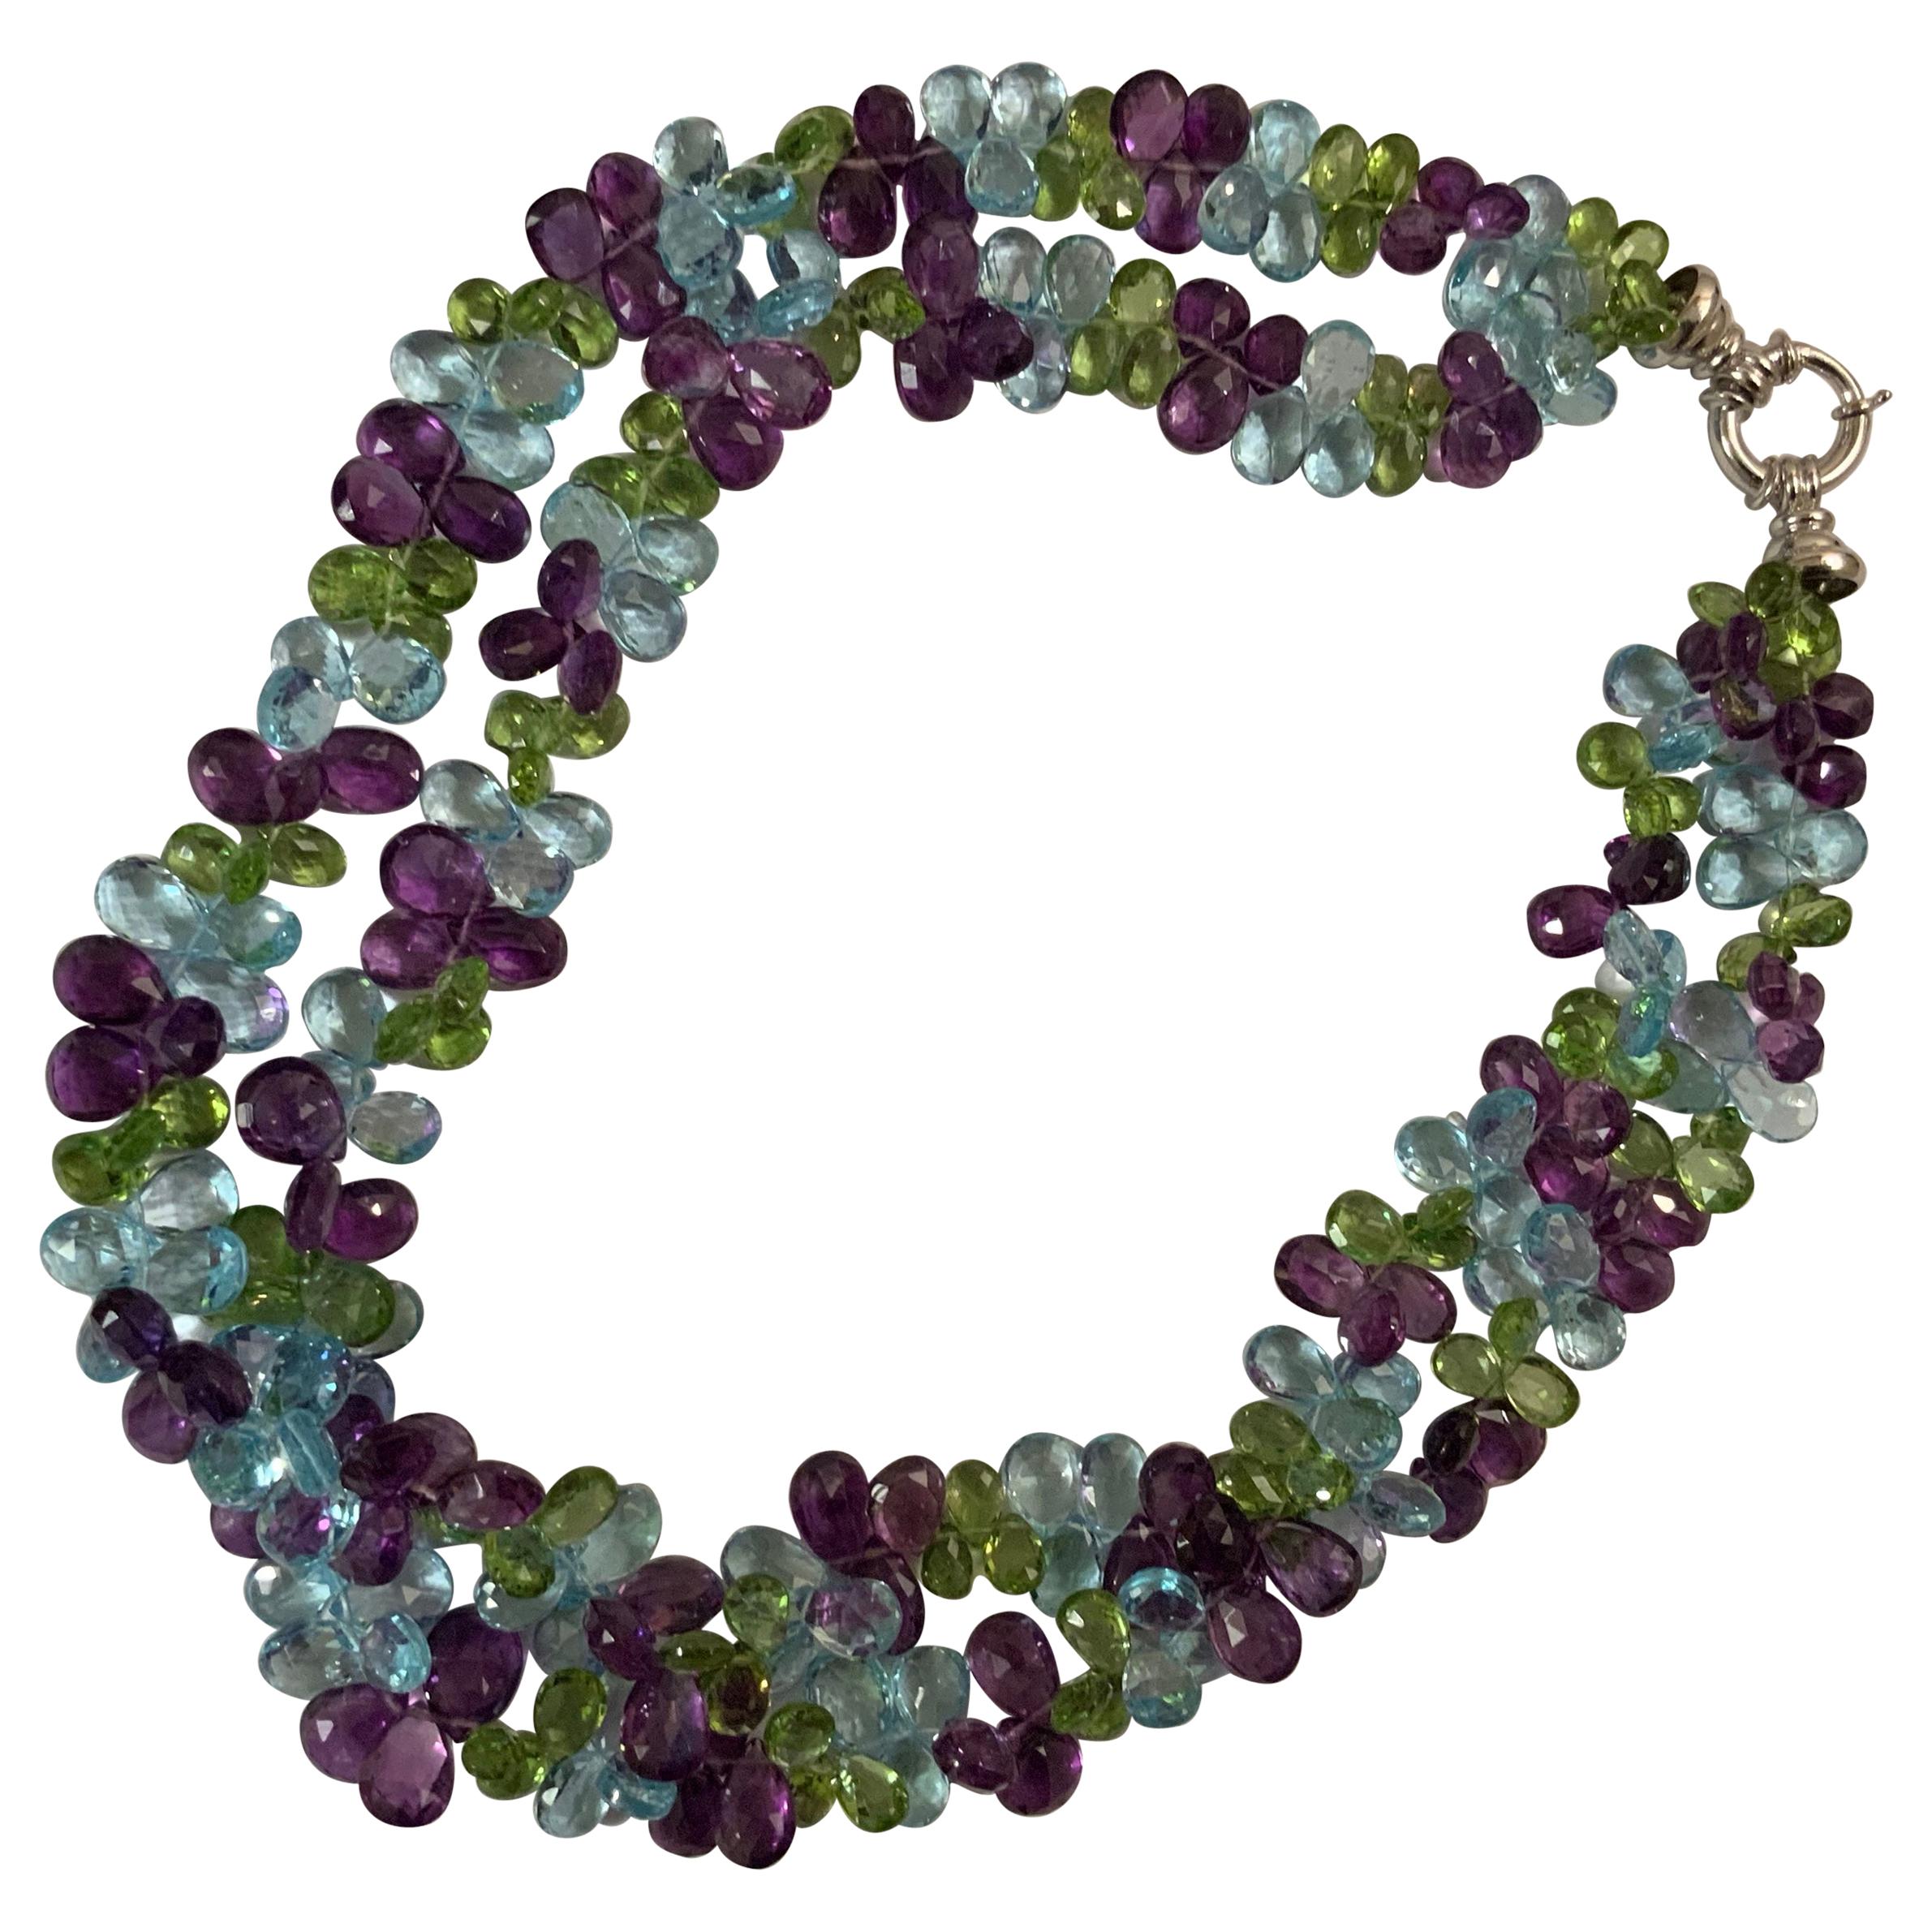 2-Strand Briolette Necklace with Blue Topaz, Peridot and Amethyst